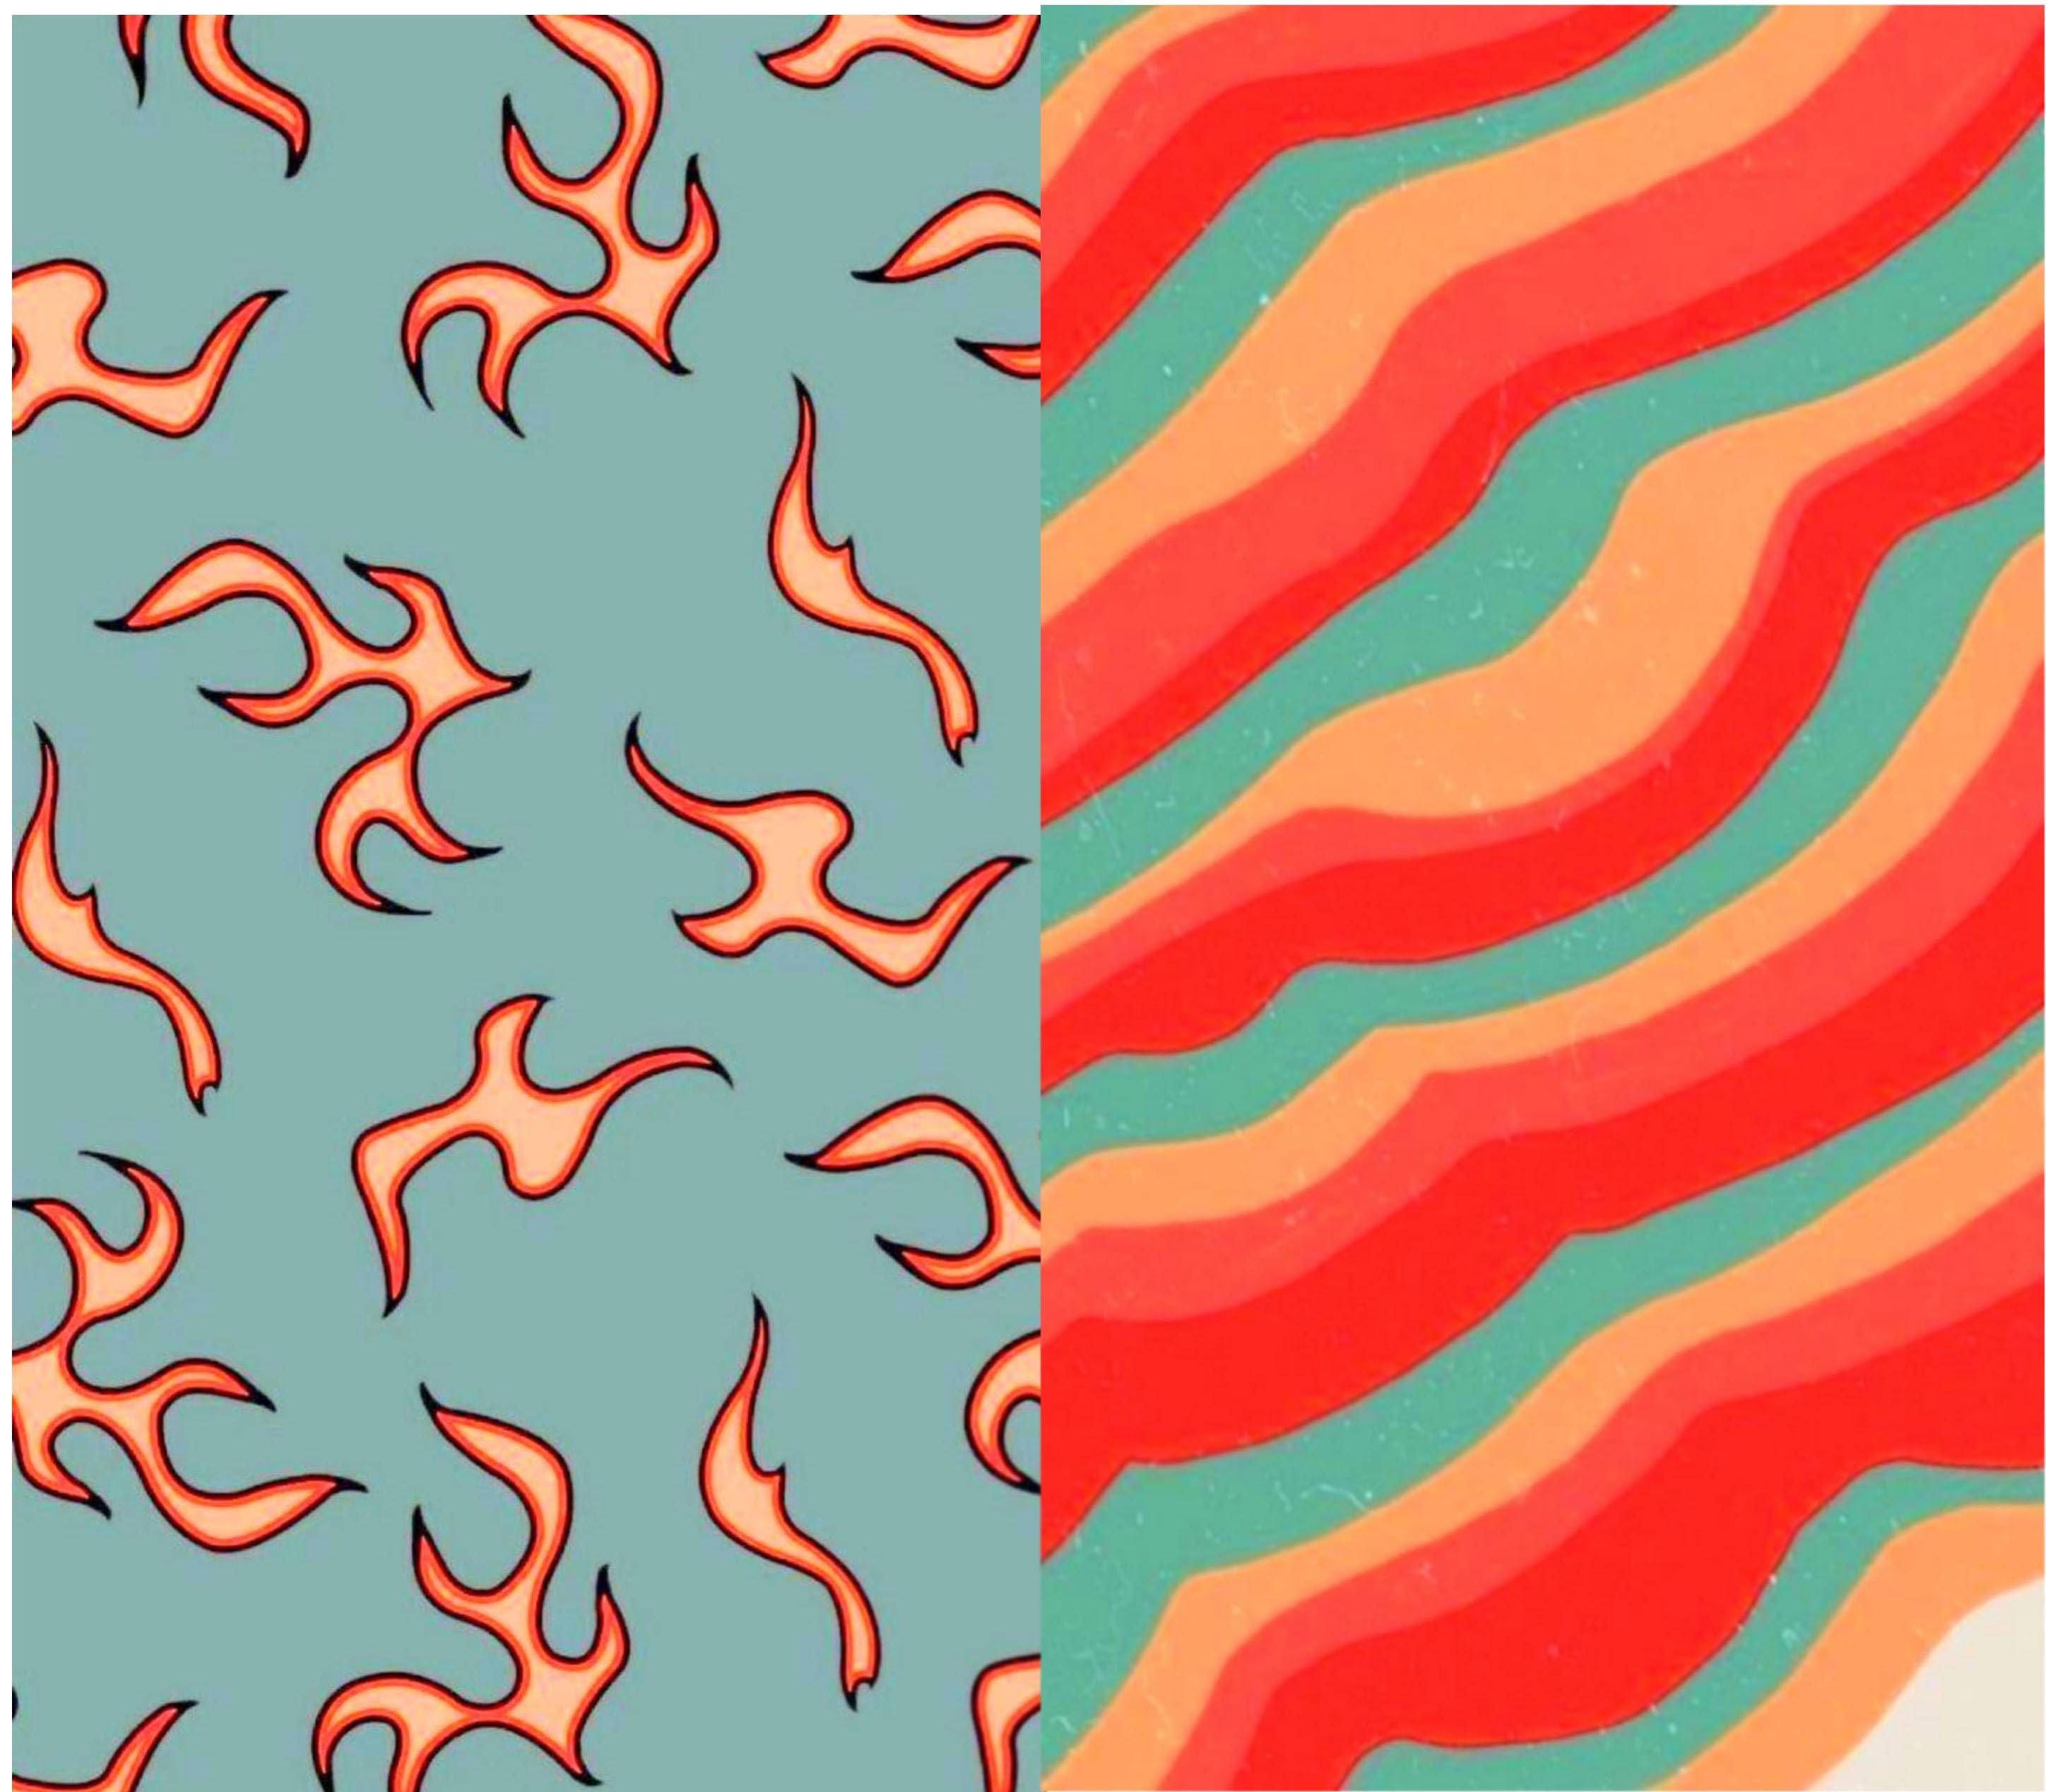 Two examples of the flame pattern. - Indie